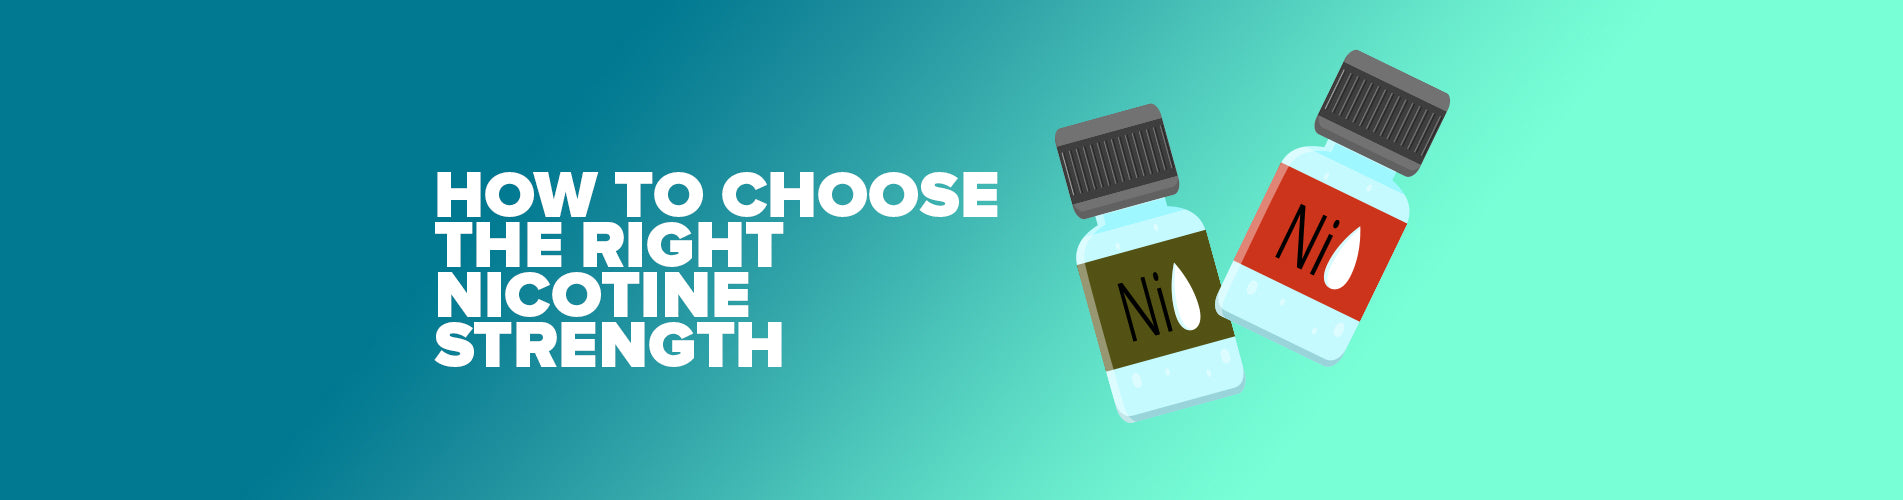 How to Choose Right Nicotine Strength